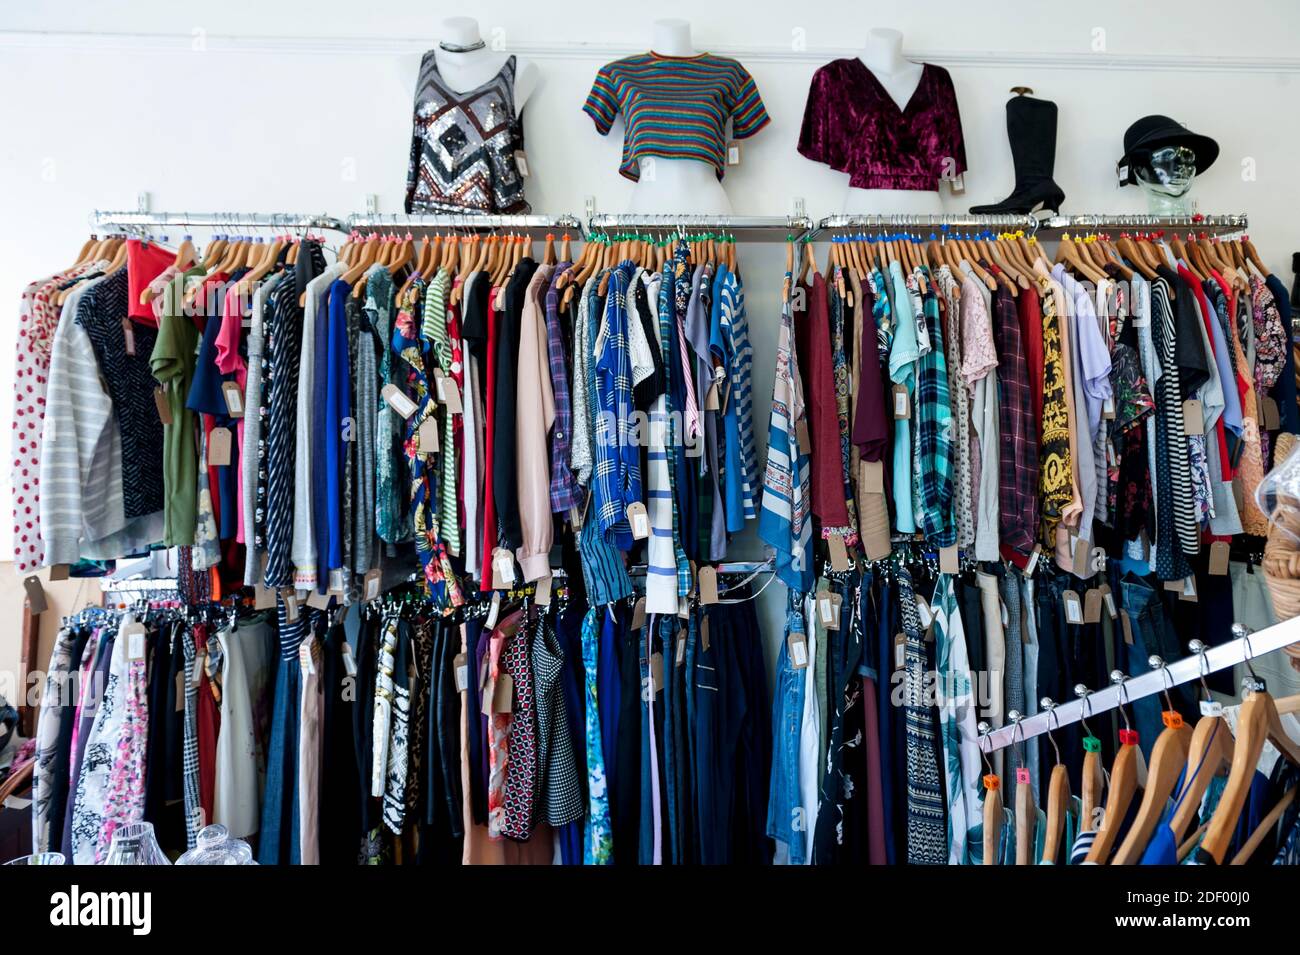 Charity shop called Found in Harrow Greater London with cloths, bric a brac and cafe. Stock Photo